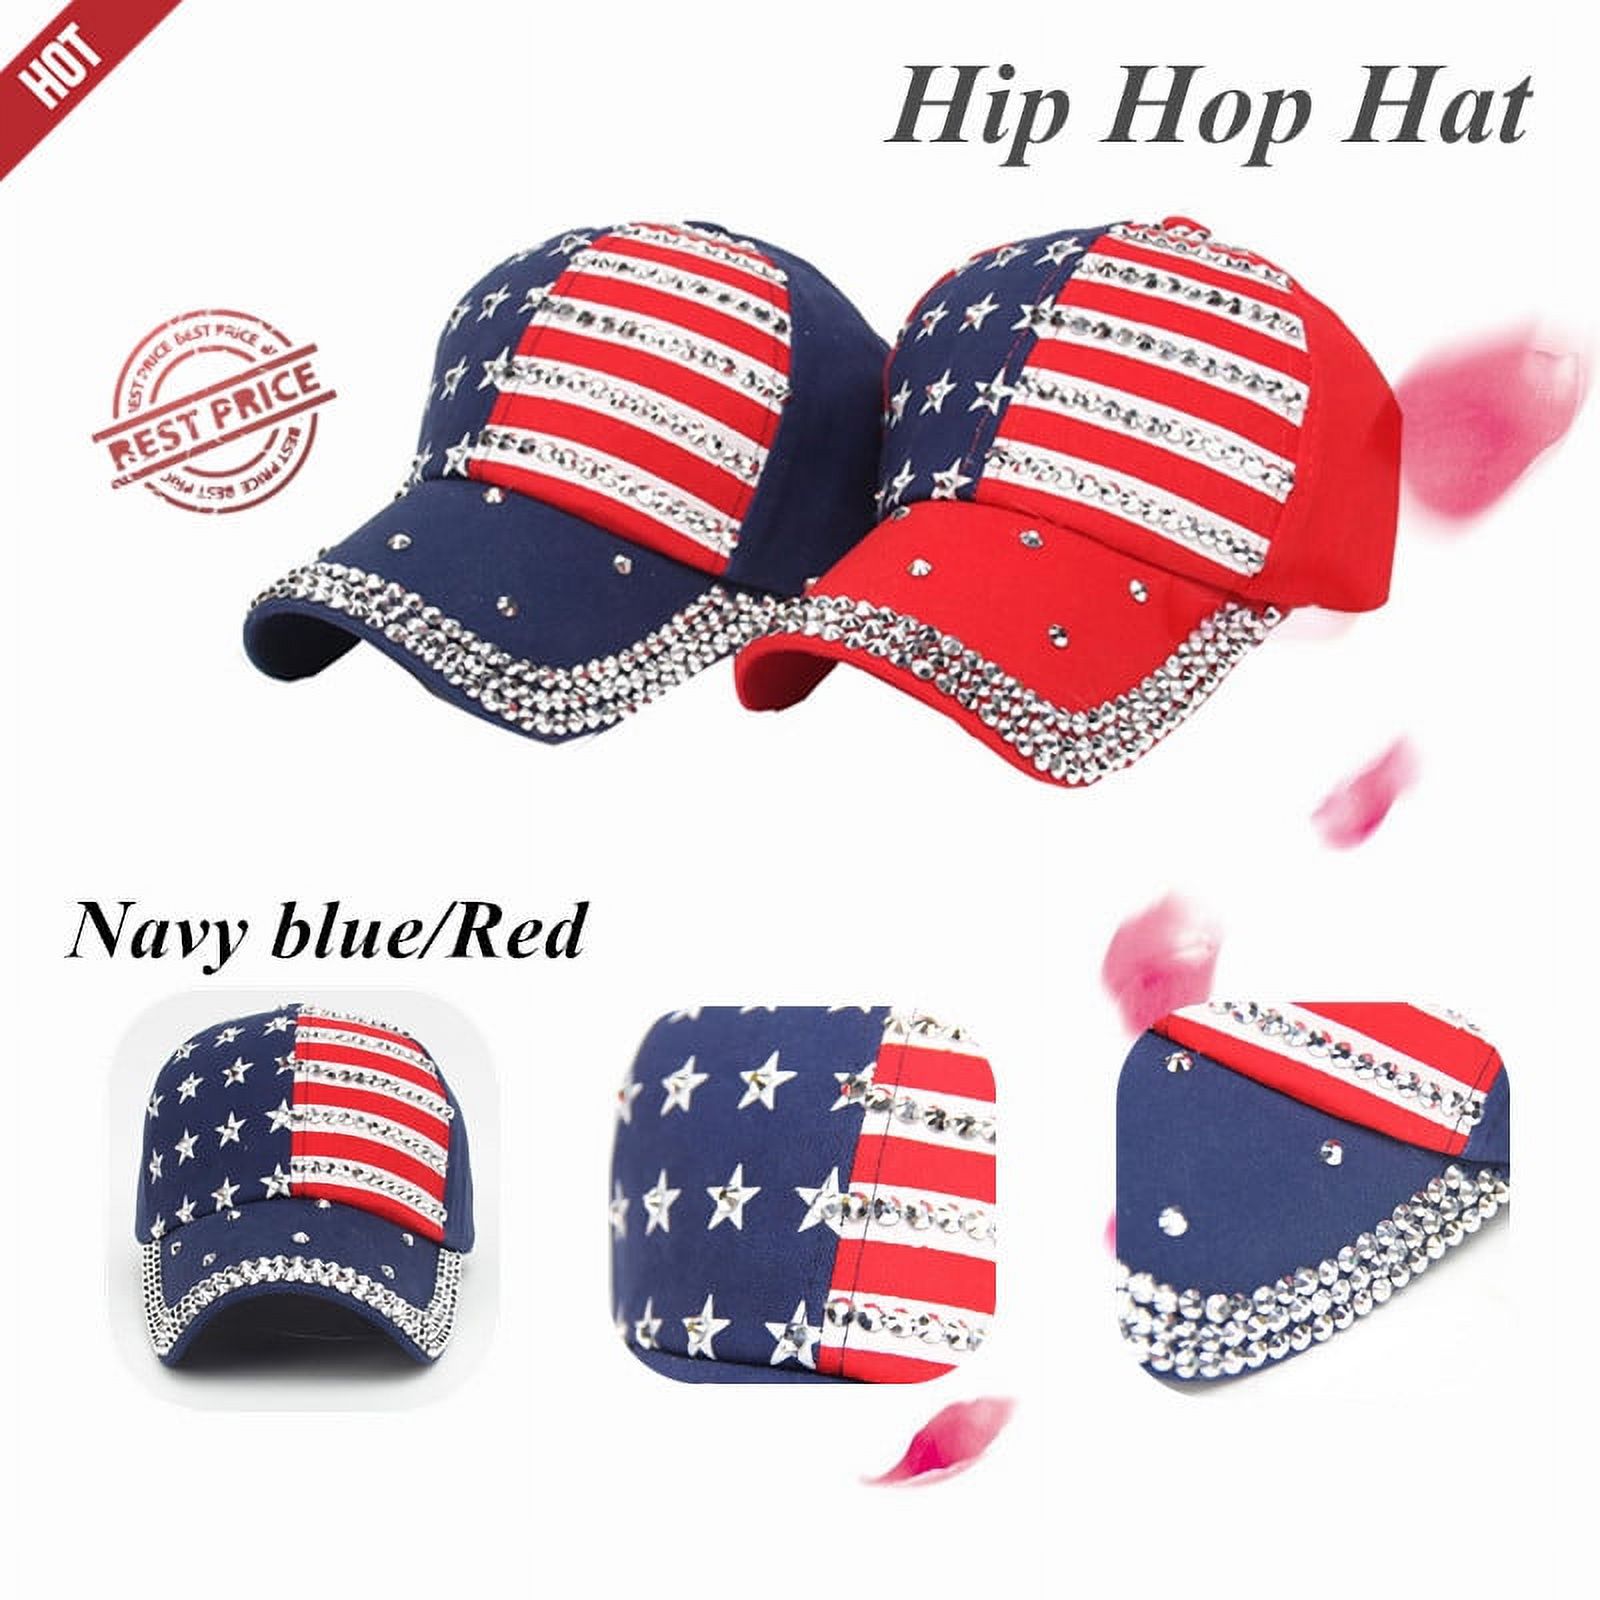 Mchoice hats for women fashionable Men sun hats Baseball Cap Snapback Hip Hop Flat Hat RD 4th of july hats on Clearance - image 2 of 2